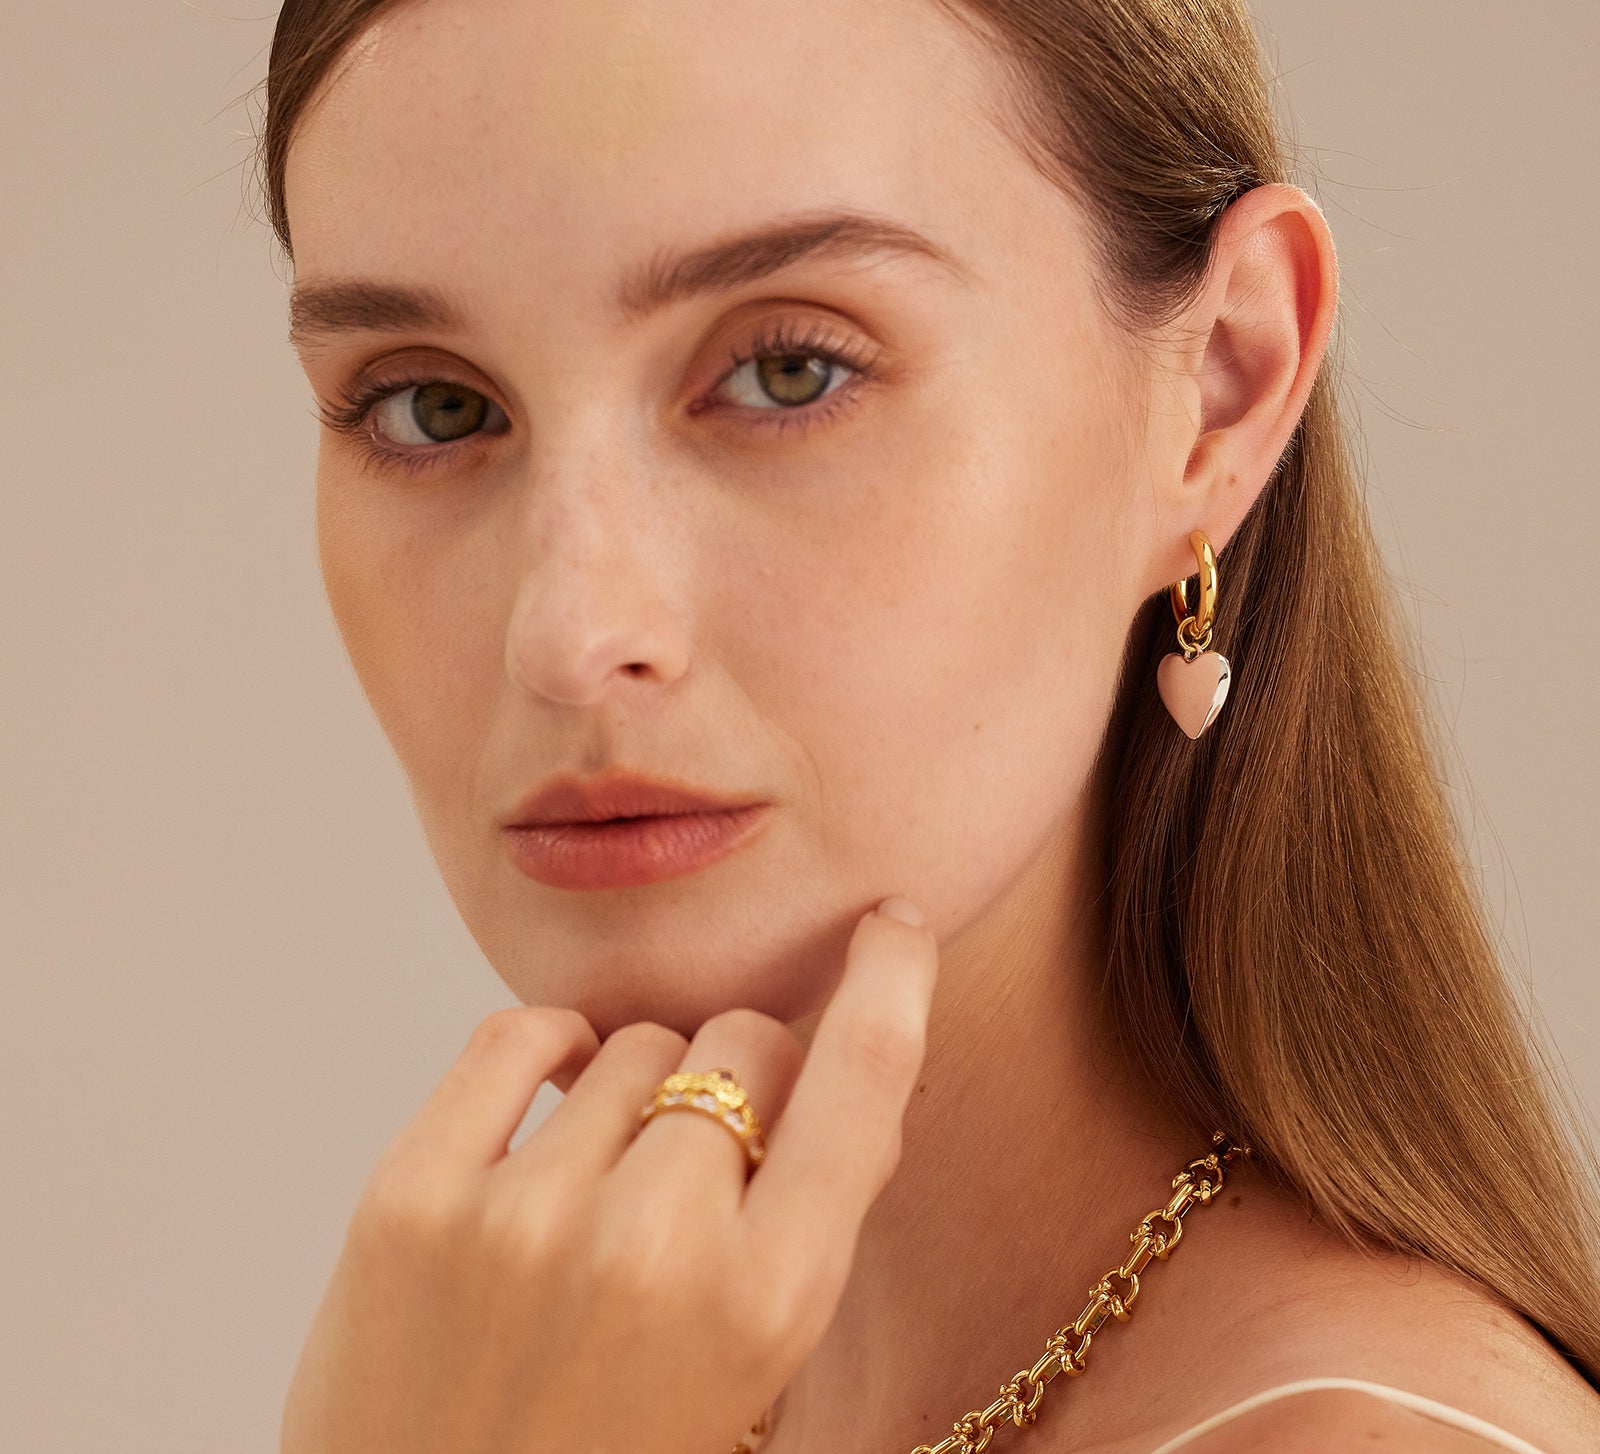  Hoop Earrings featuring heart-shaped tunnels, a love-infused design that exudes romance and sweet sentiment in every twist